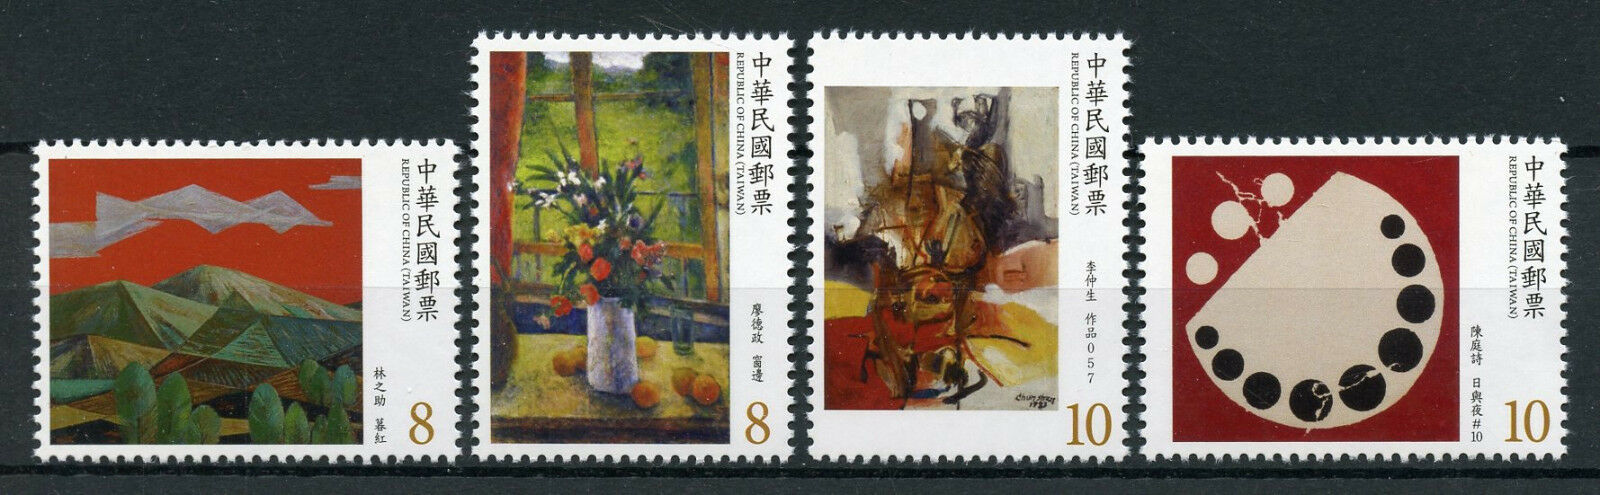 Taiwan China 2018 MNH Modern Paintings Flowers Landscapes 4v Set Art Stamps